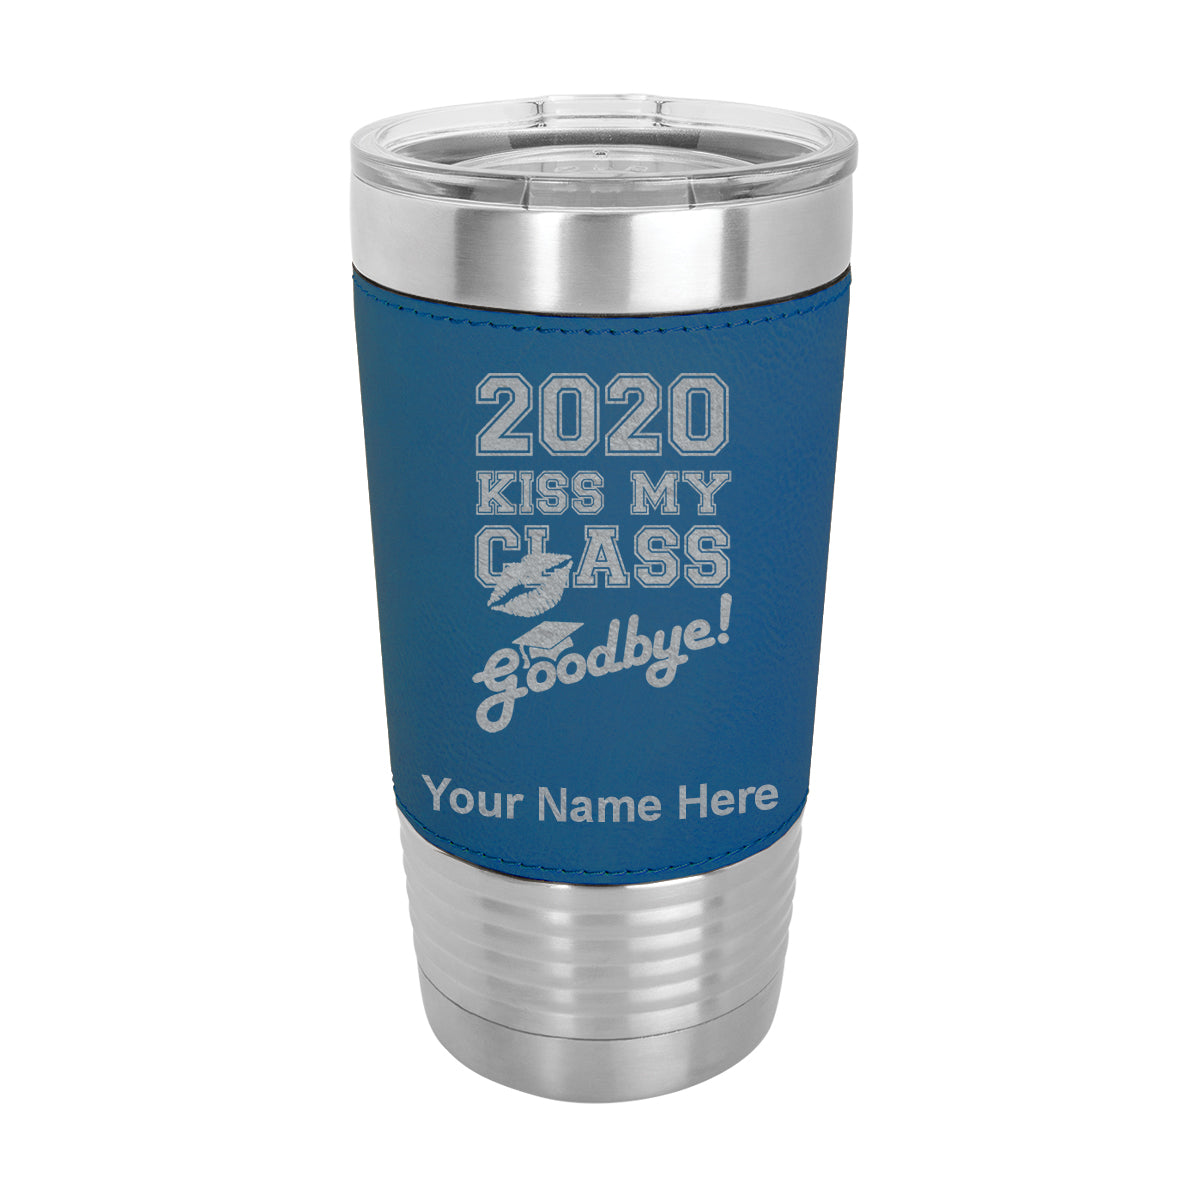 20oz Faux Leather Tumbler Mug, Kiss My Class Goodbye 2020, 2021, 2022, 2023 2024, 2025, Personalized Engraving Included - LaserGram Custom Engraved Gifts